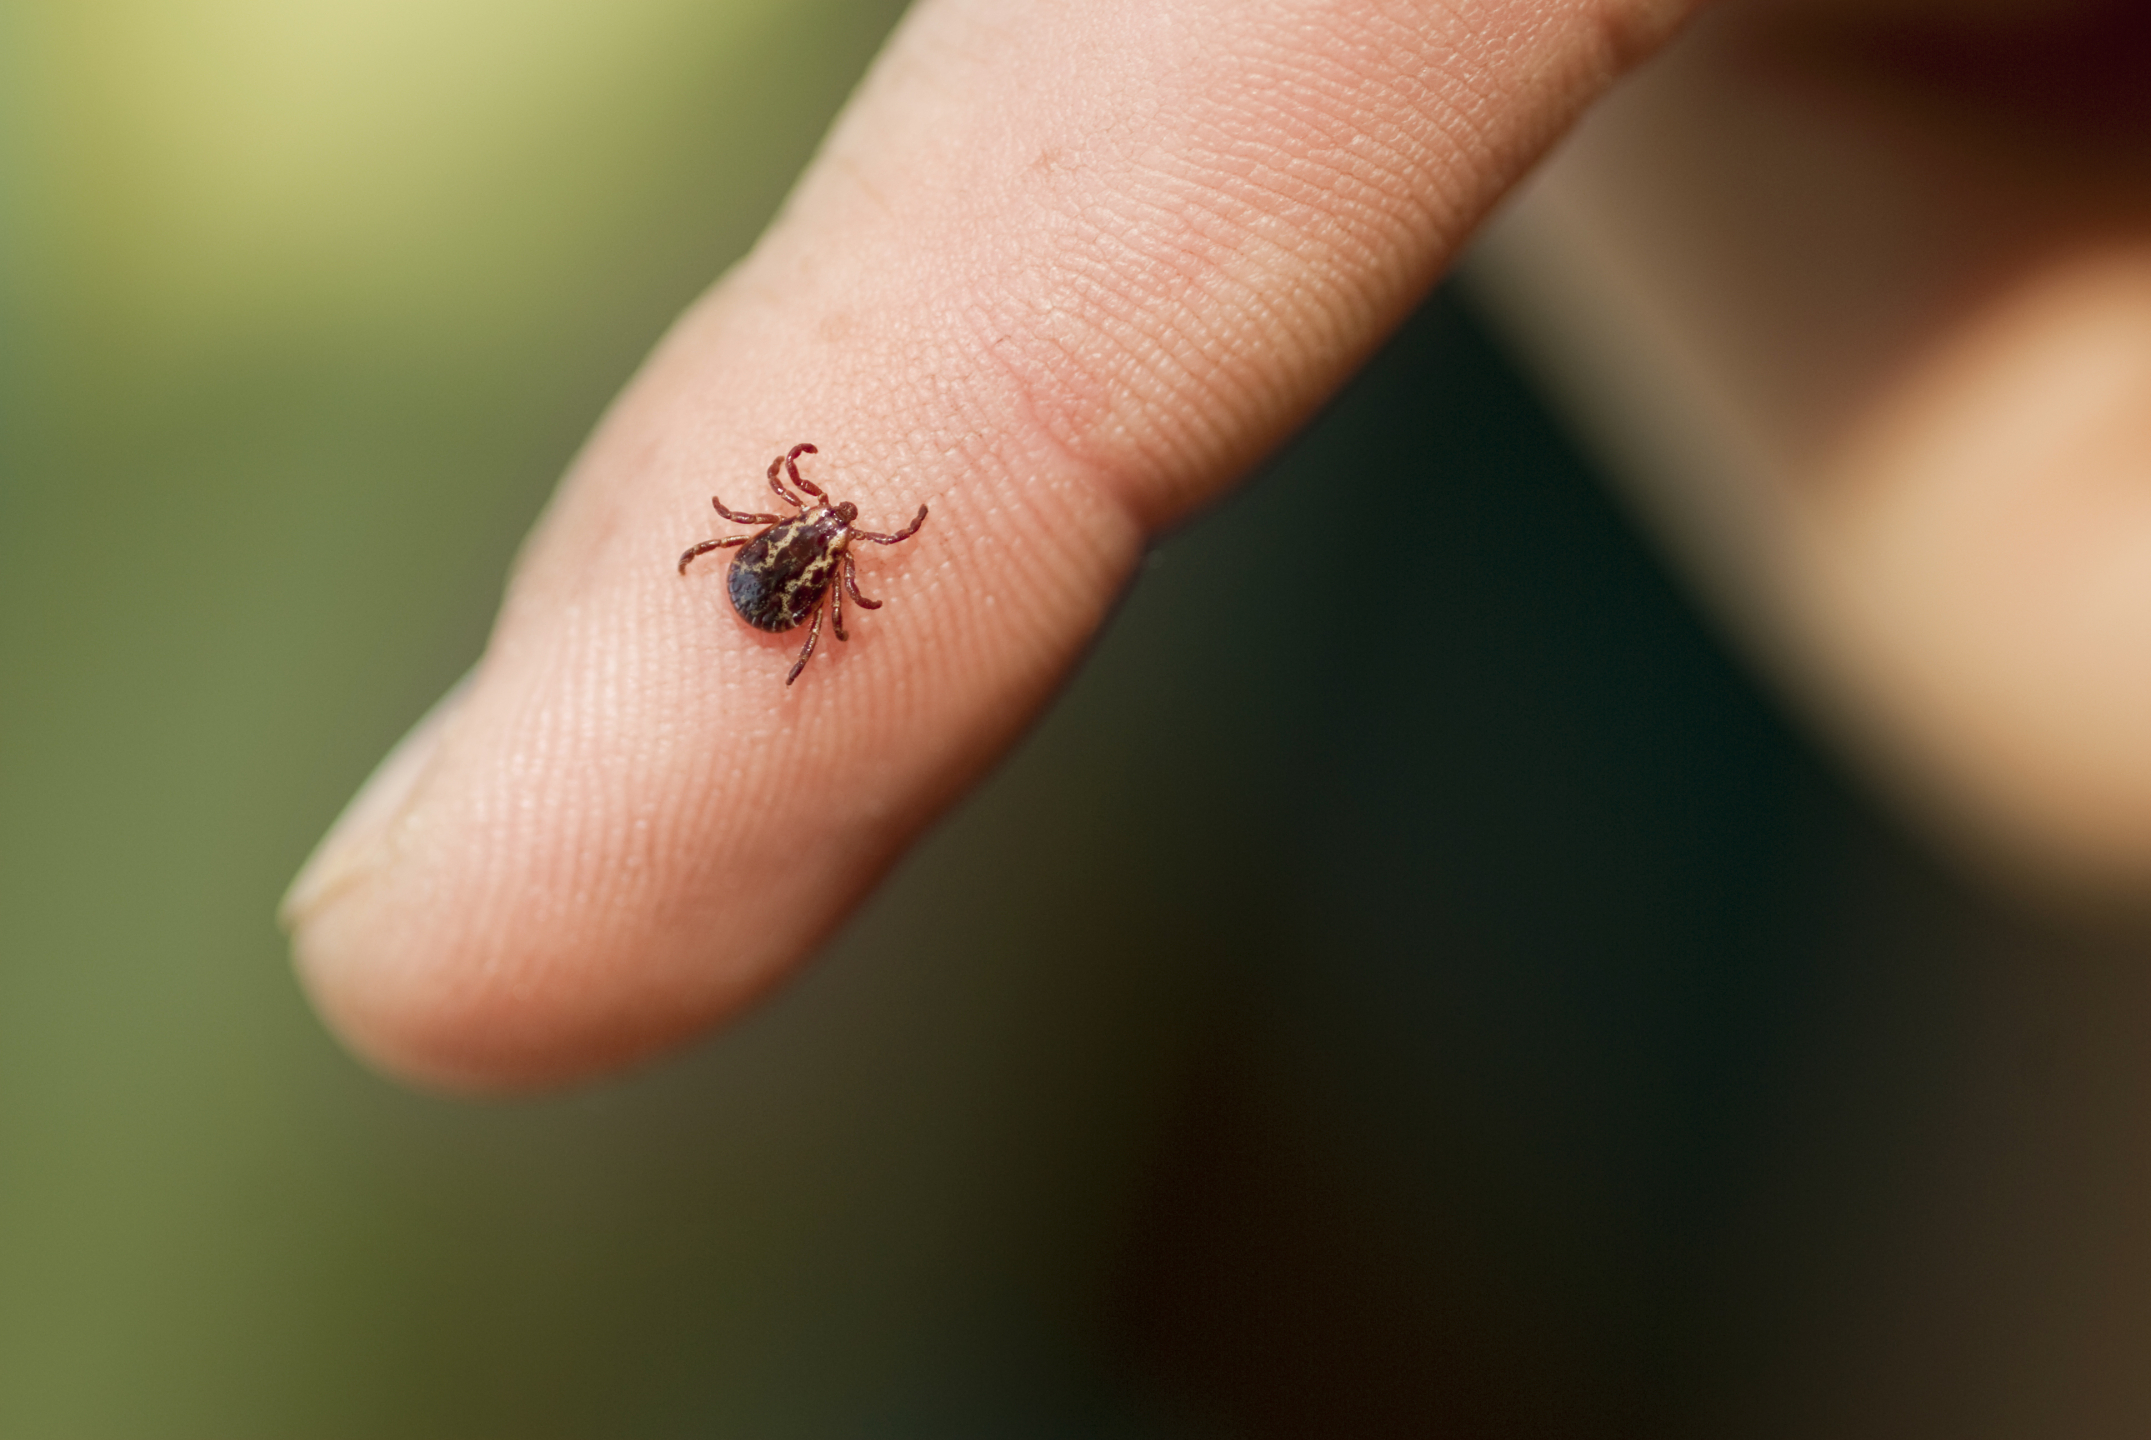 Diseases that can be Transmitted by Ticks